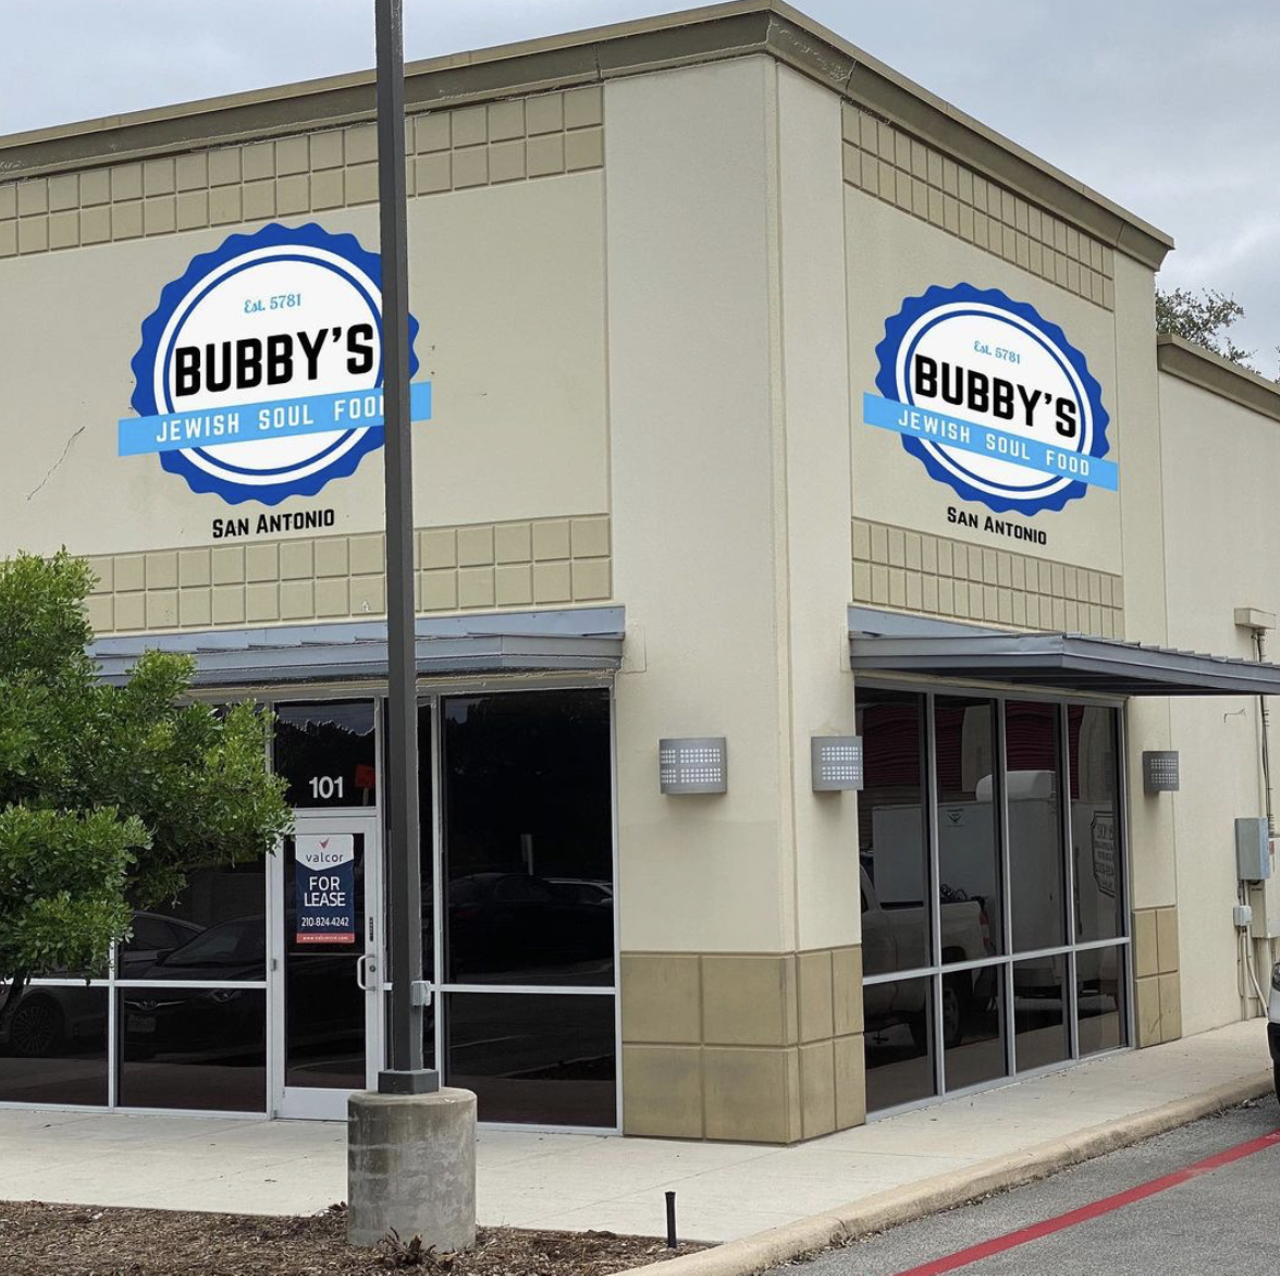 Bubby’s Jewish Soul Food
12730 NW Military Hwy., (210) 504-6040, bubbysjsf.com
California transplants Jason and Charlie Nuttall-Fiske aim to bring a taste of Jewish fare to the Alamo City this fall via recipes from their family archives. Folks can expect handcrafted bagels, bialys and babkas as well as a slew of sandwiches, soups and deli counter items, as well as soul food items curated from handwritten recipes passed down to the pair from relatives.  
Photo via Instagram / bubbysjsf